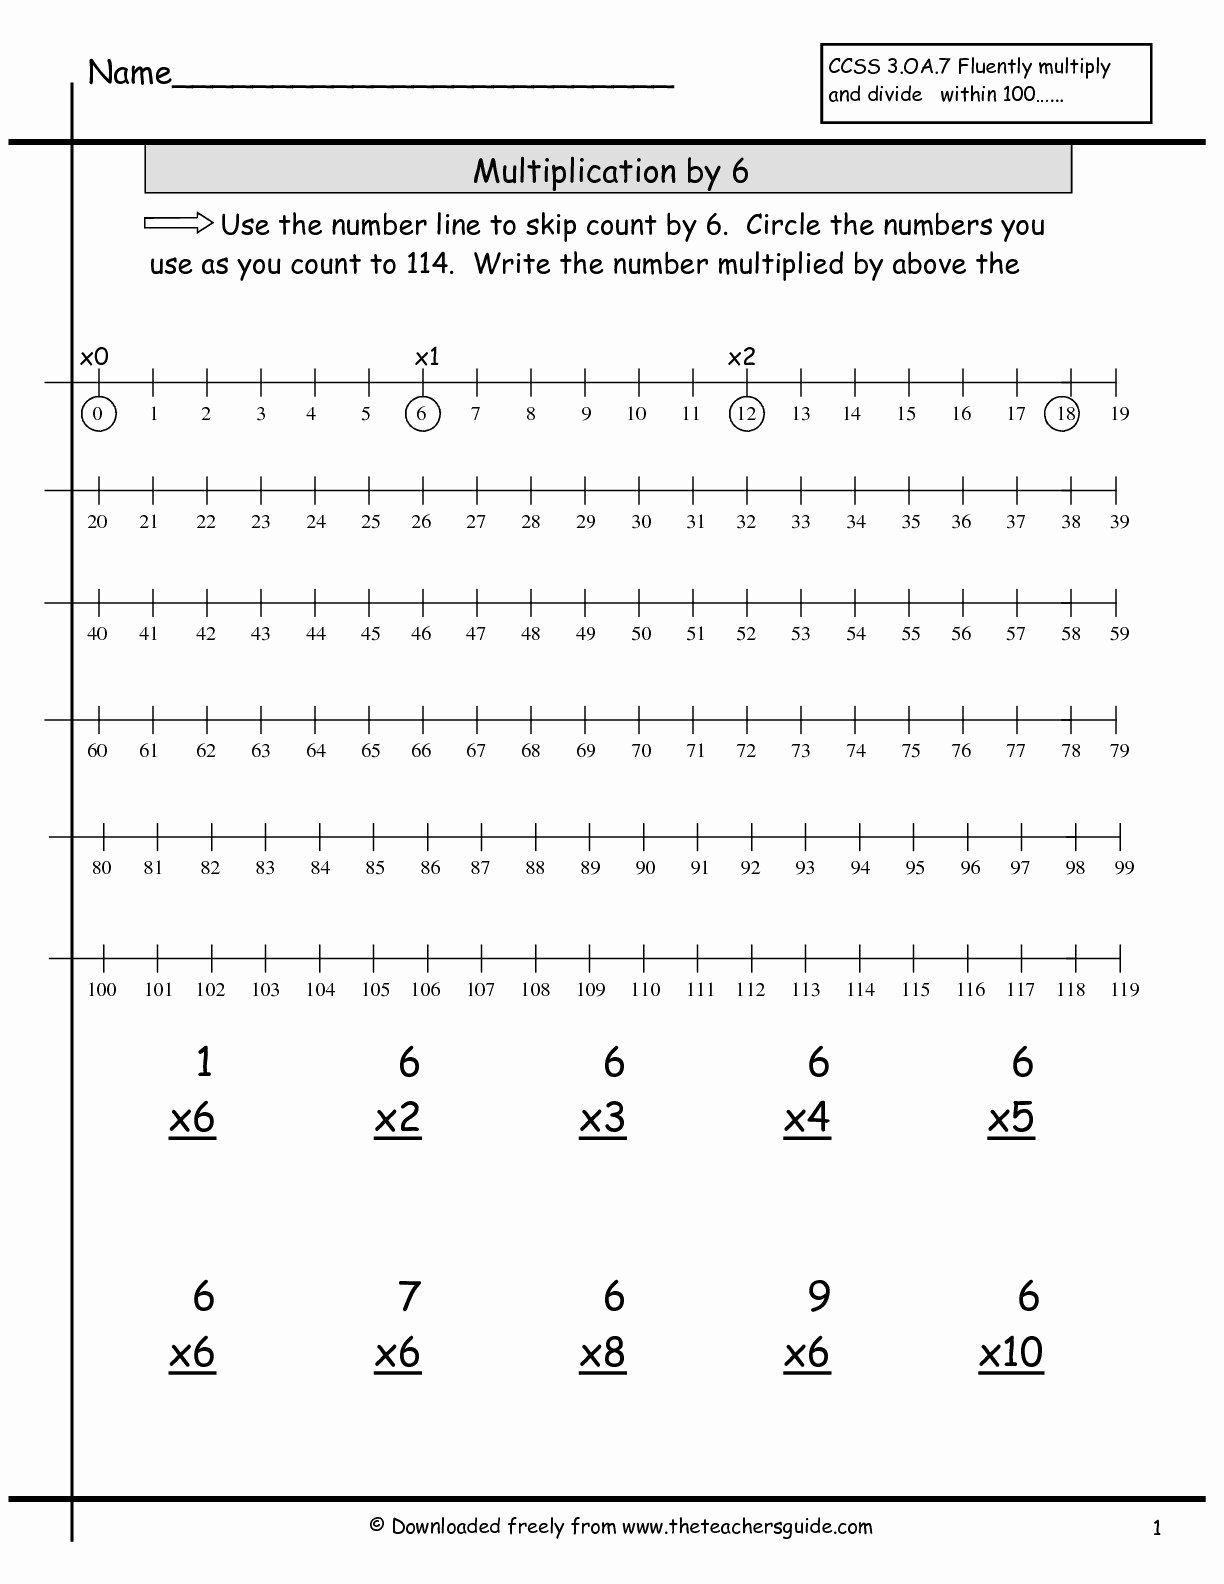 Multiplying by 6 Worksheet Luxury Multiplication Facts Worksheets From the Teacher S Guide